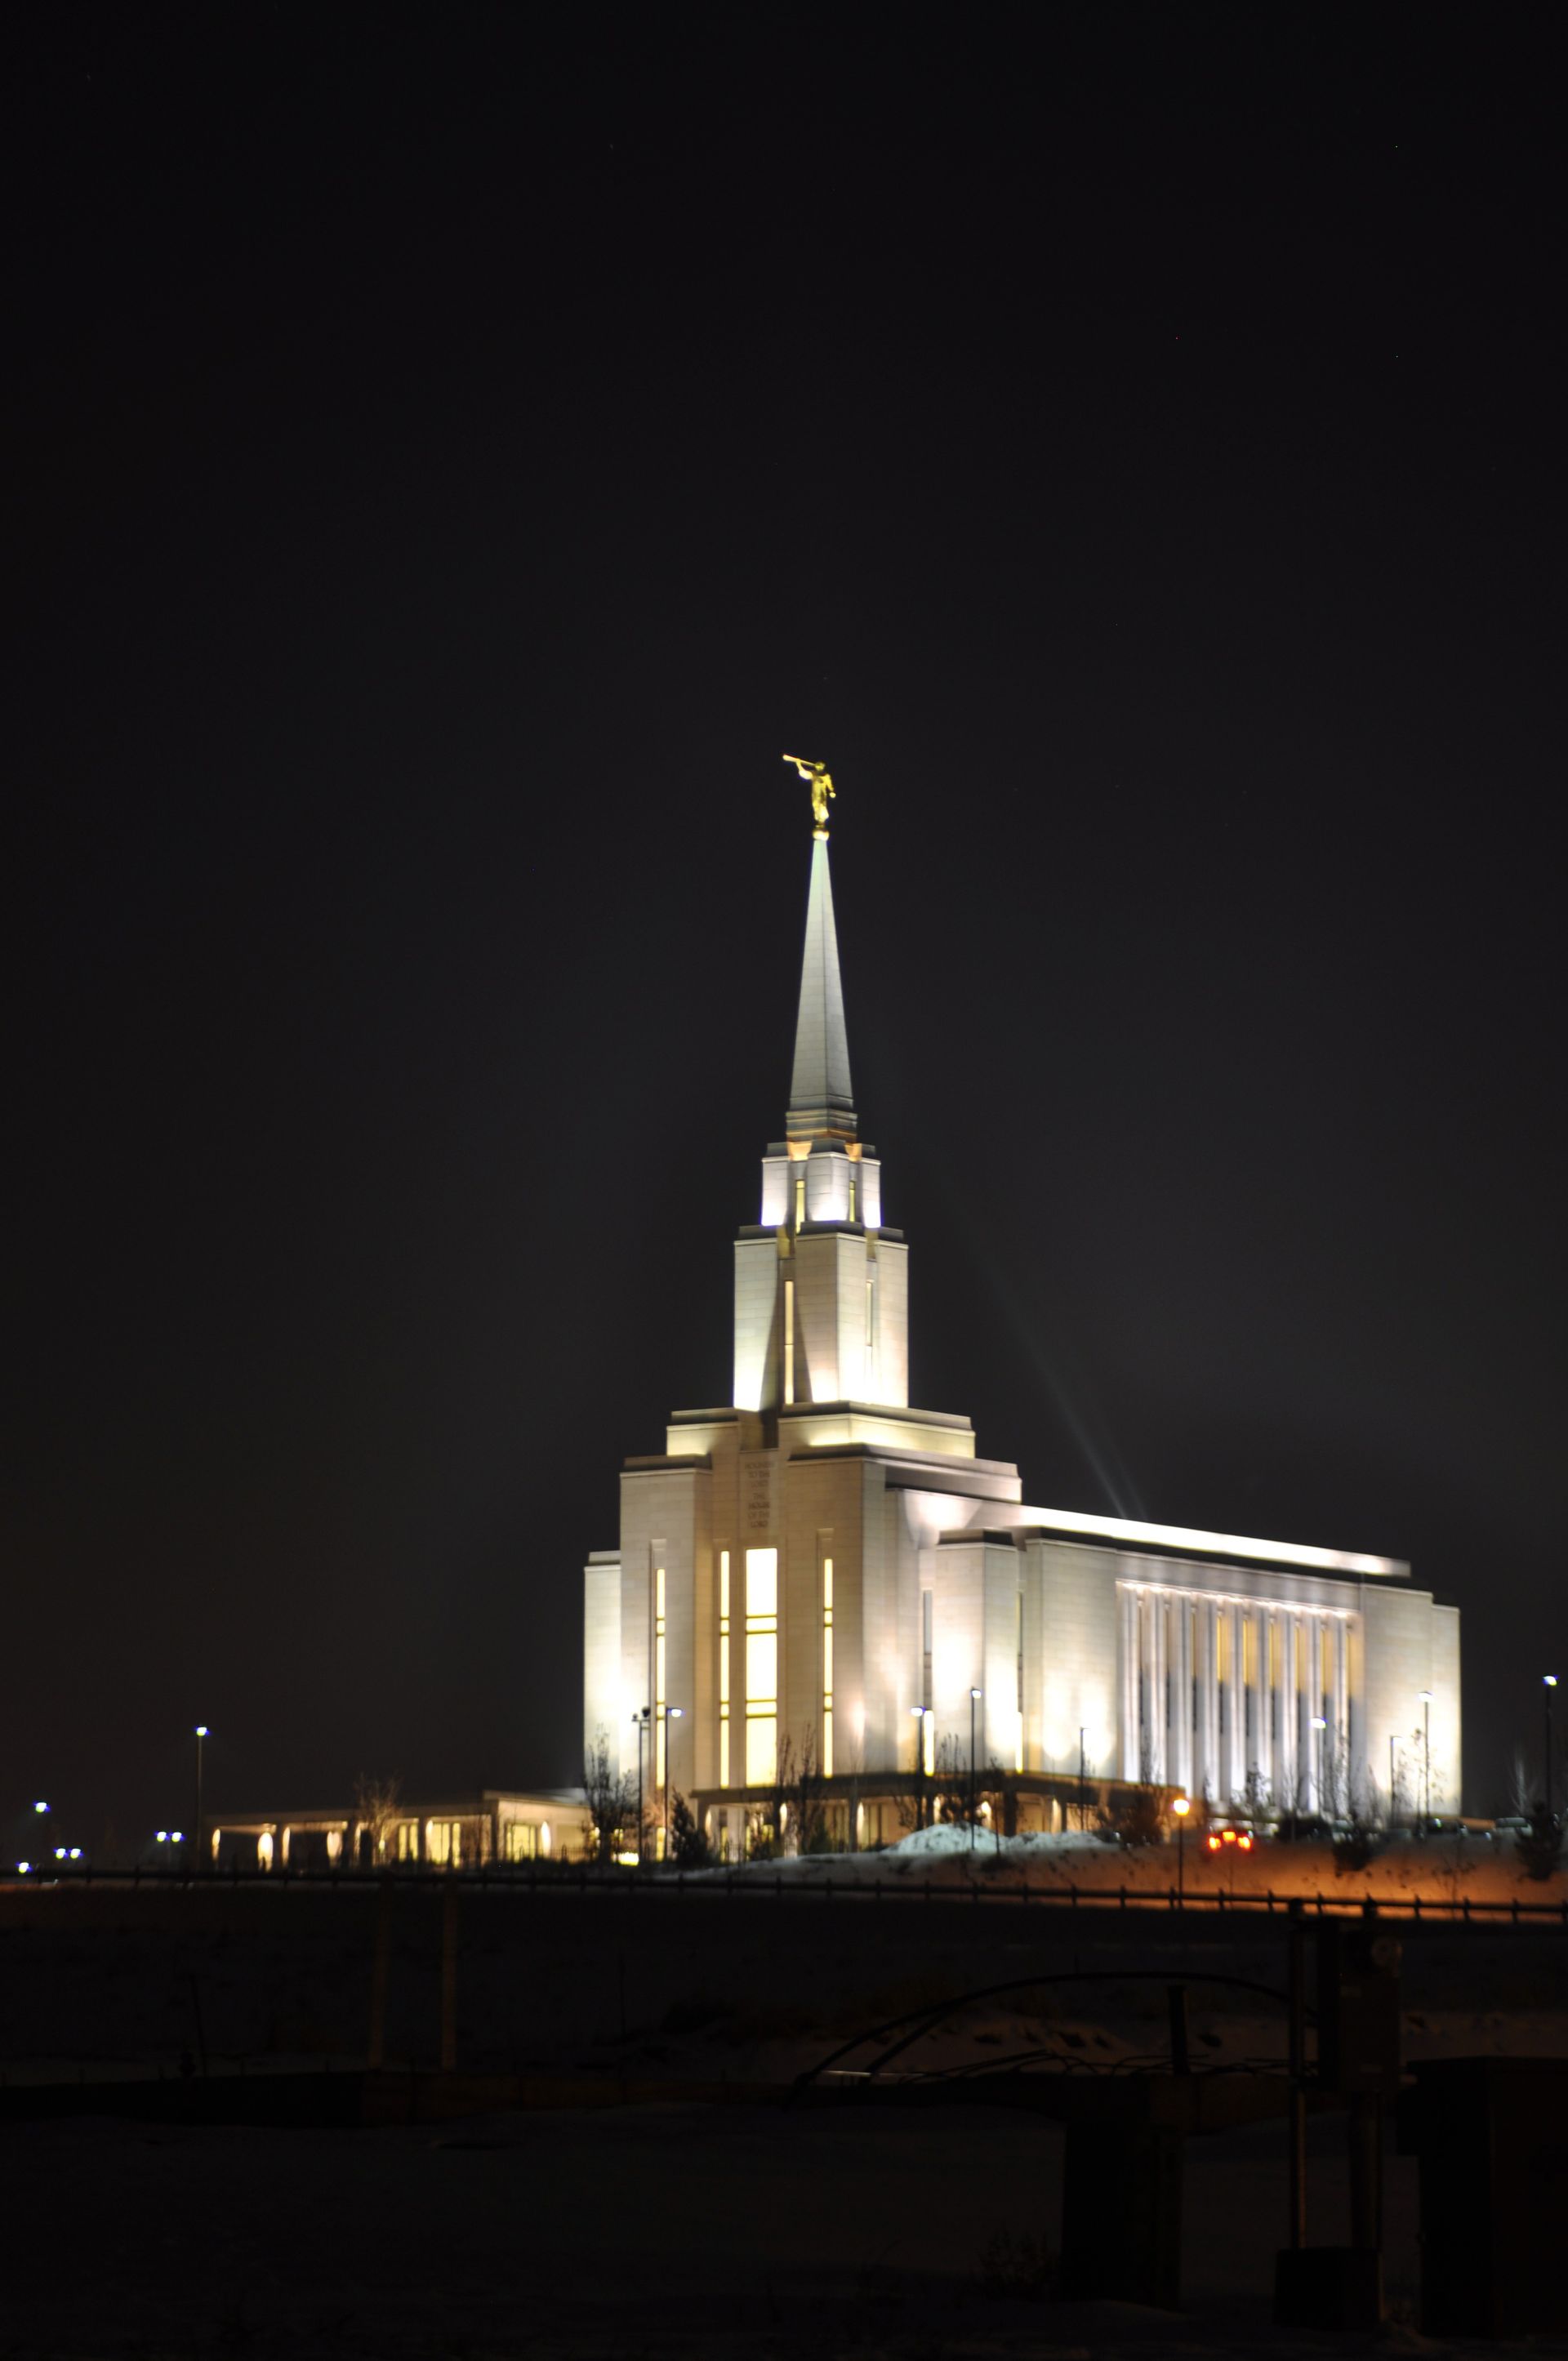 The Oquirrh Mountain Utah Temple in the evening.